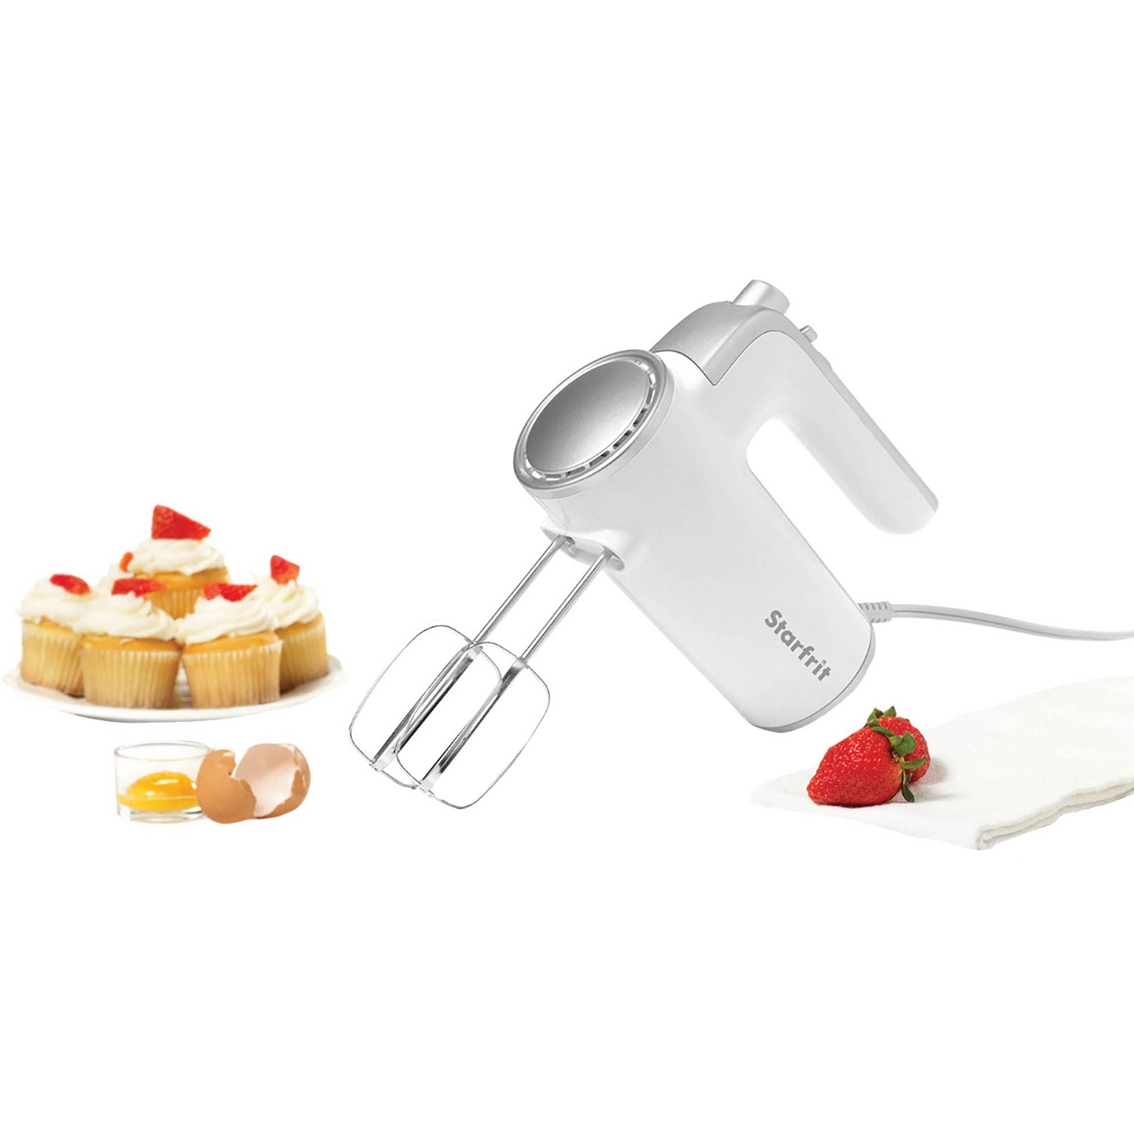 Starfrit 6 Speed 250W Electric Hand Mixer - Image 5 of 5